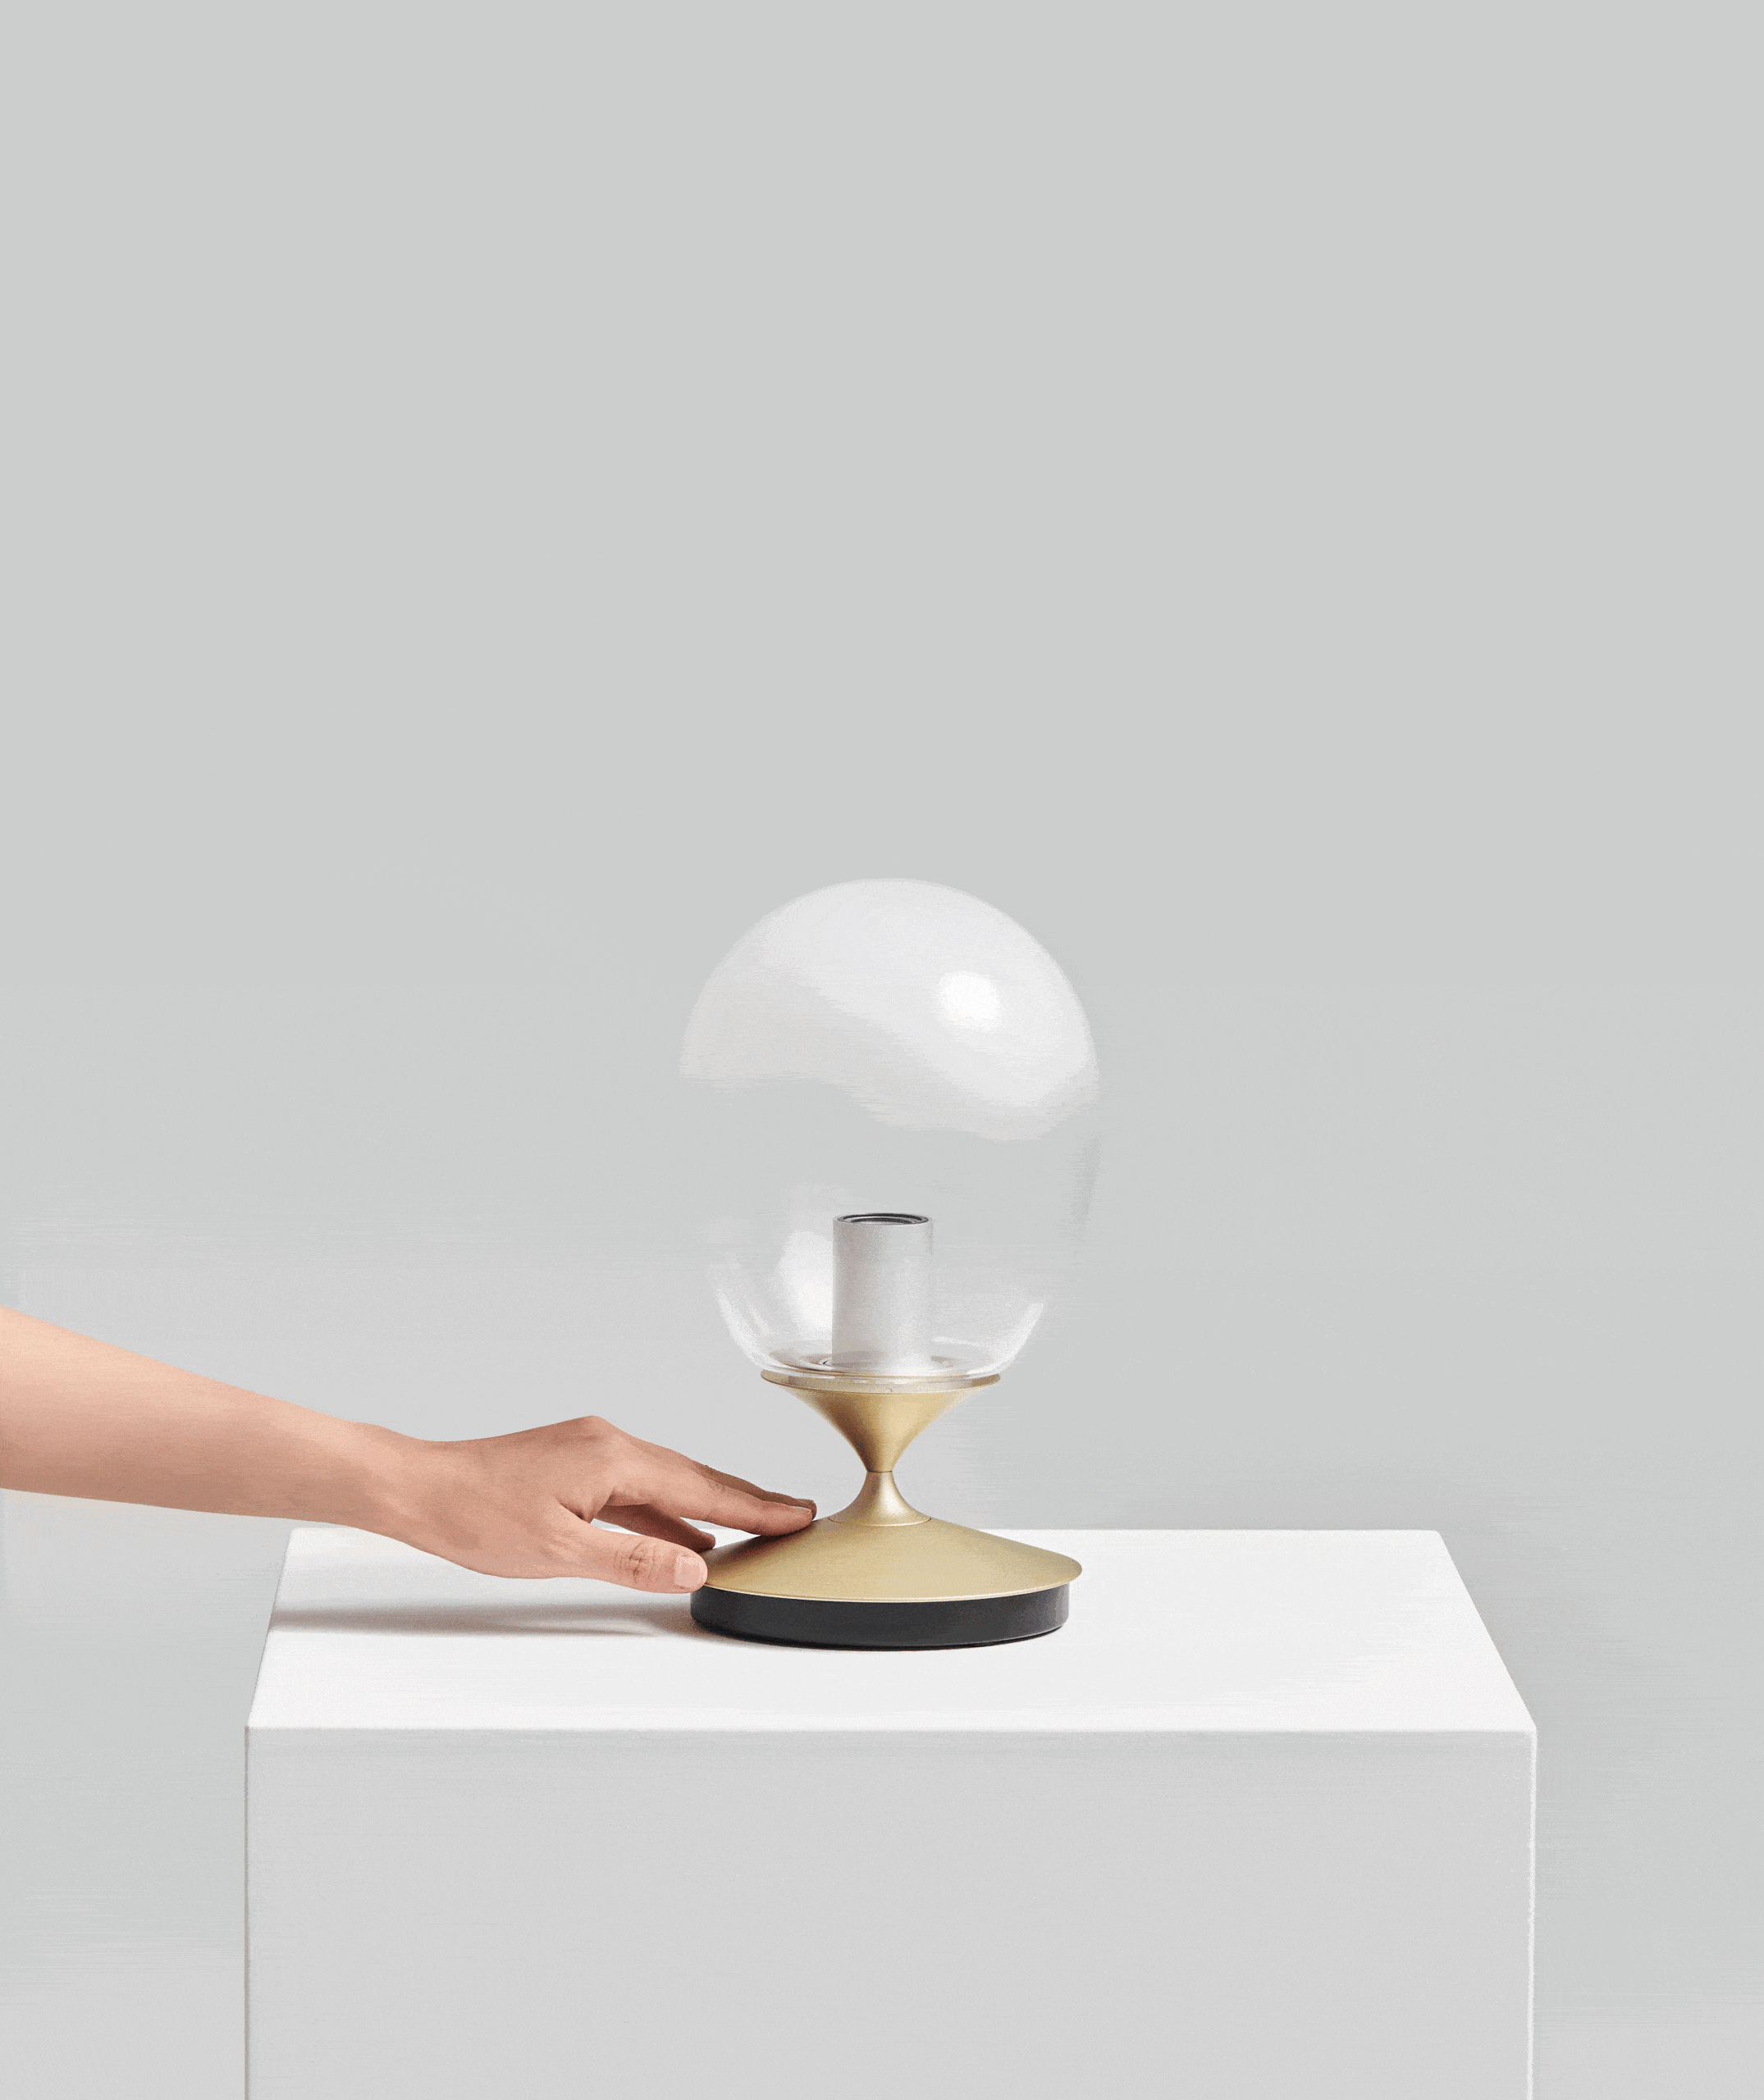 MIST LED Table Lamp S / L | SEED Design USA Online Store